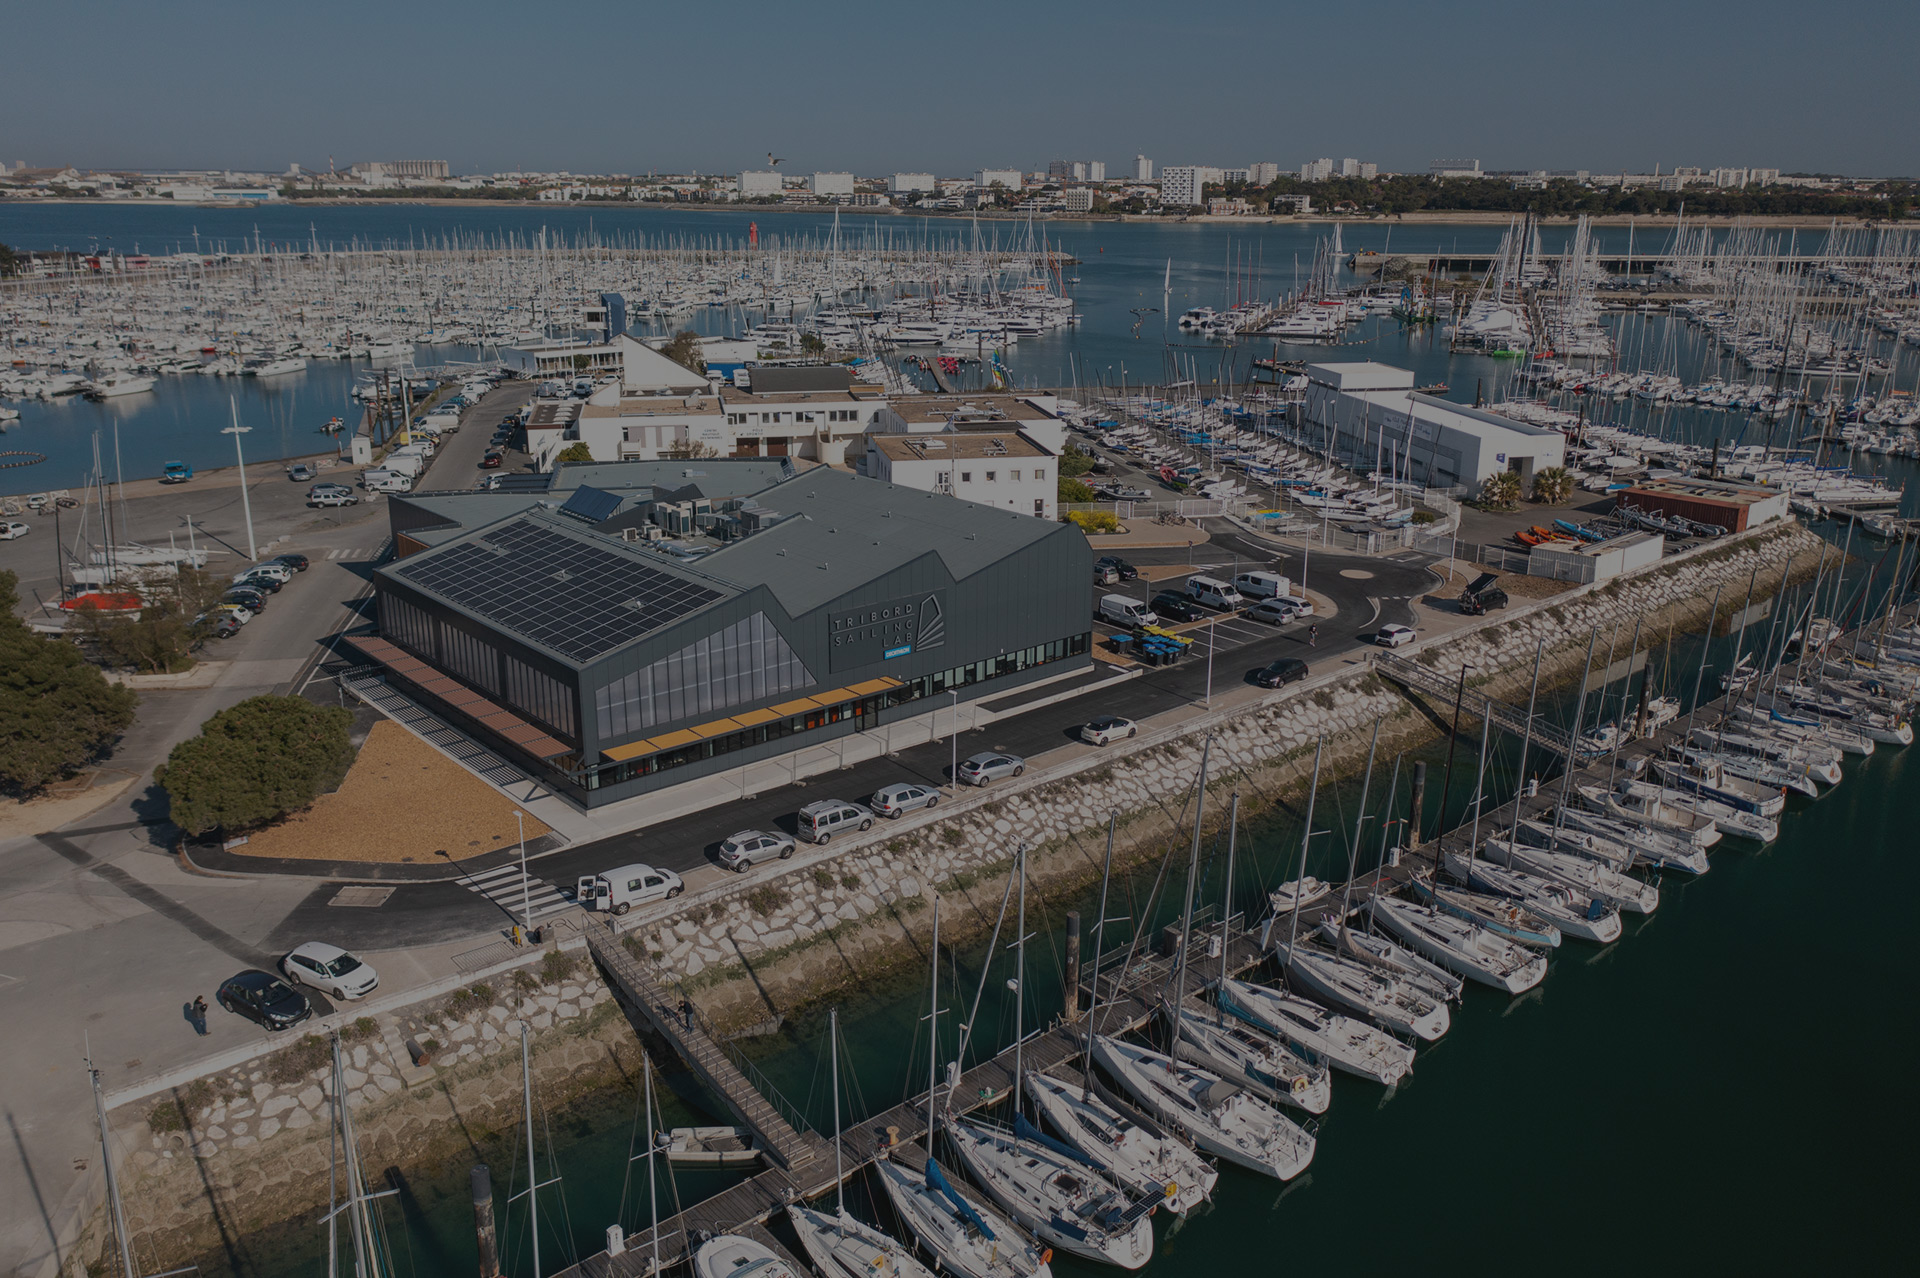 Welcome in the new Tribord Sailing Lab of La Rochelle